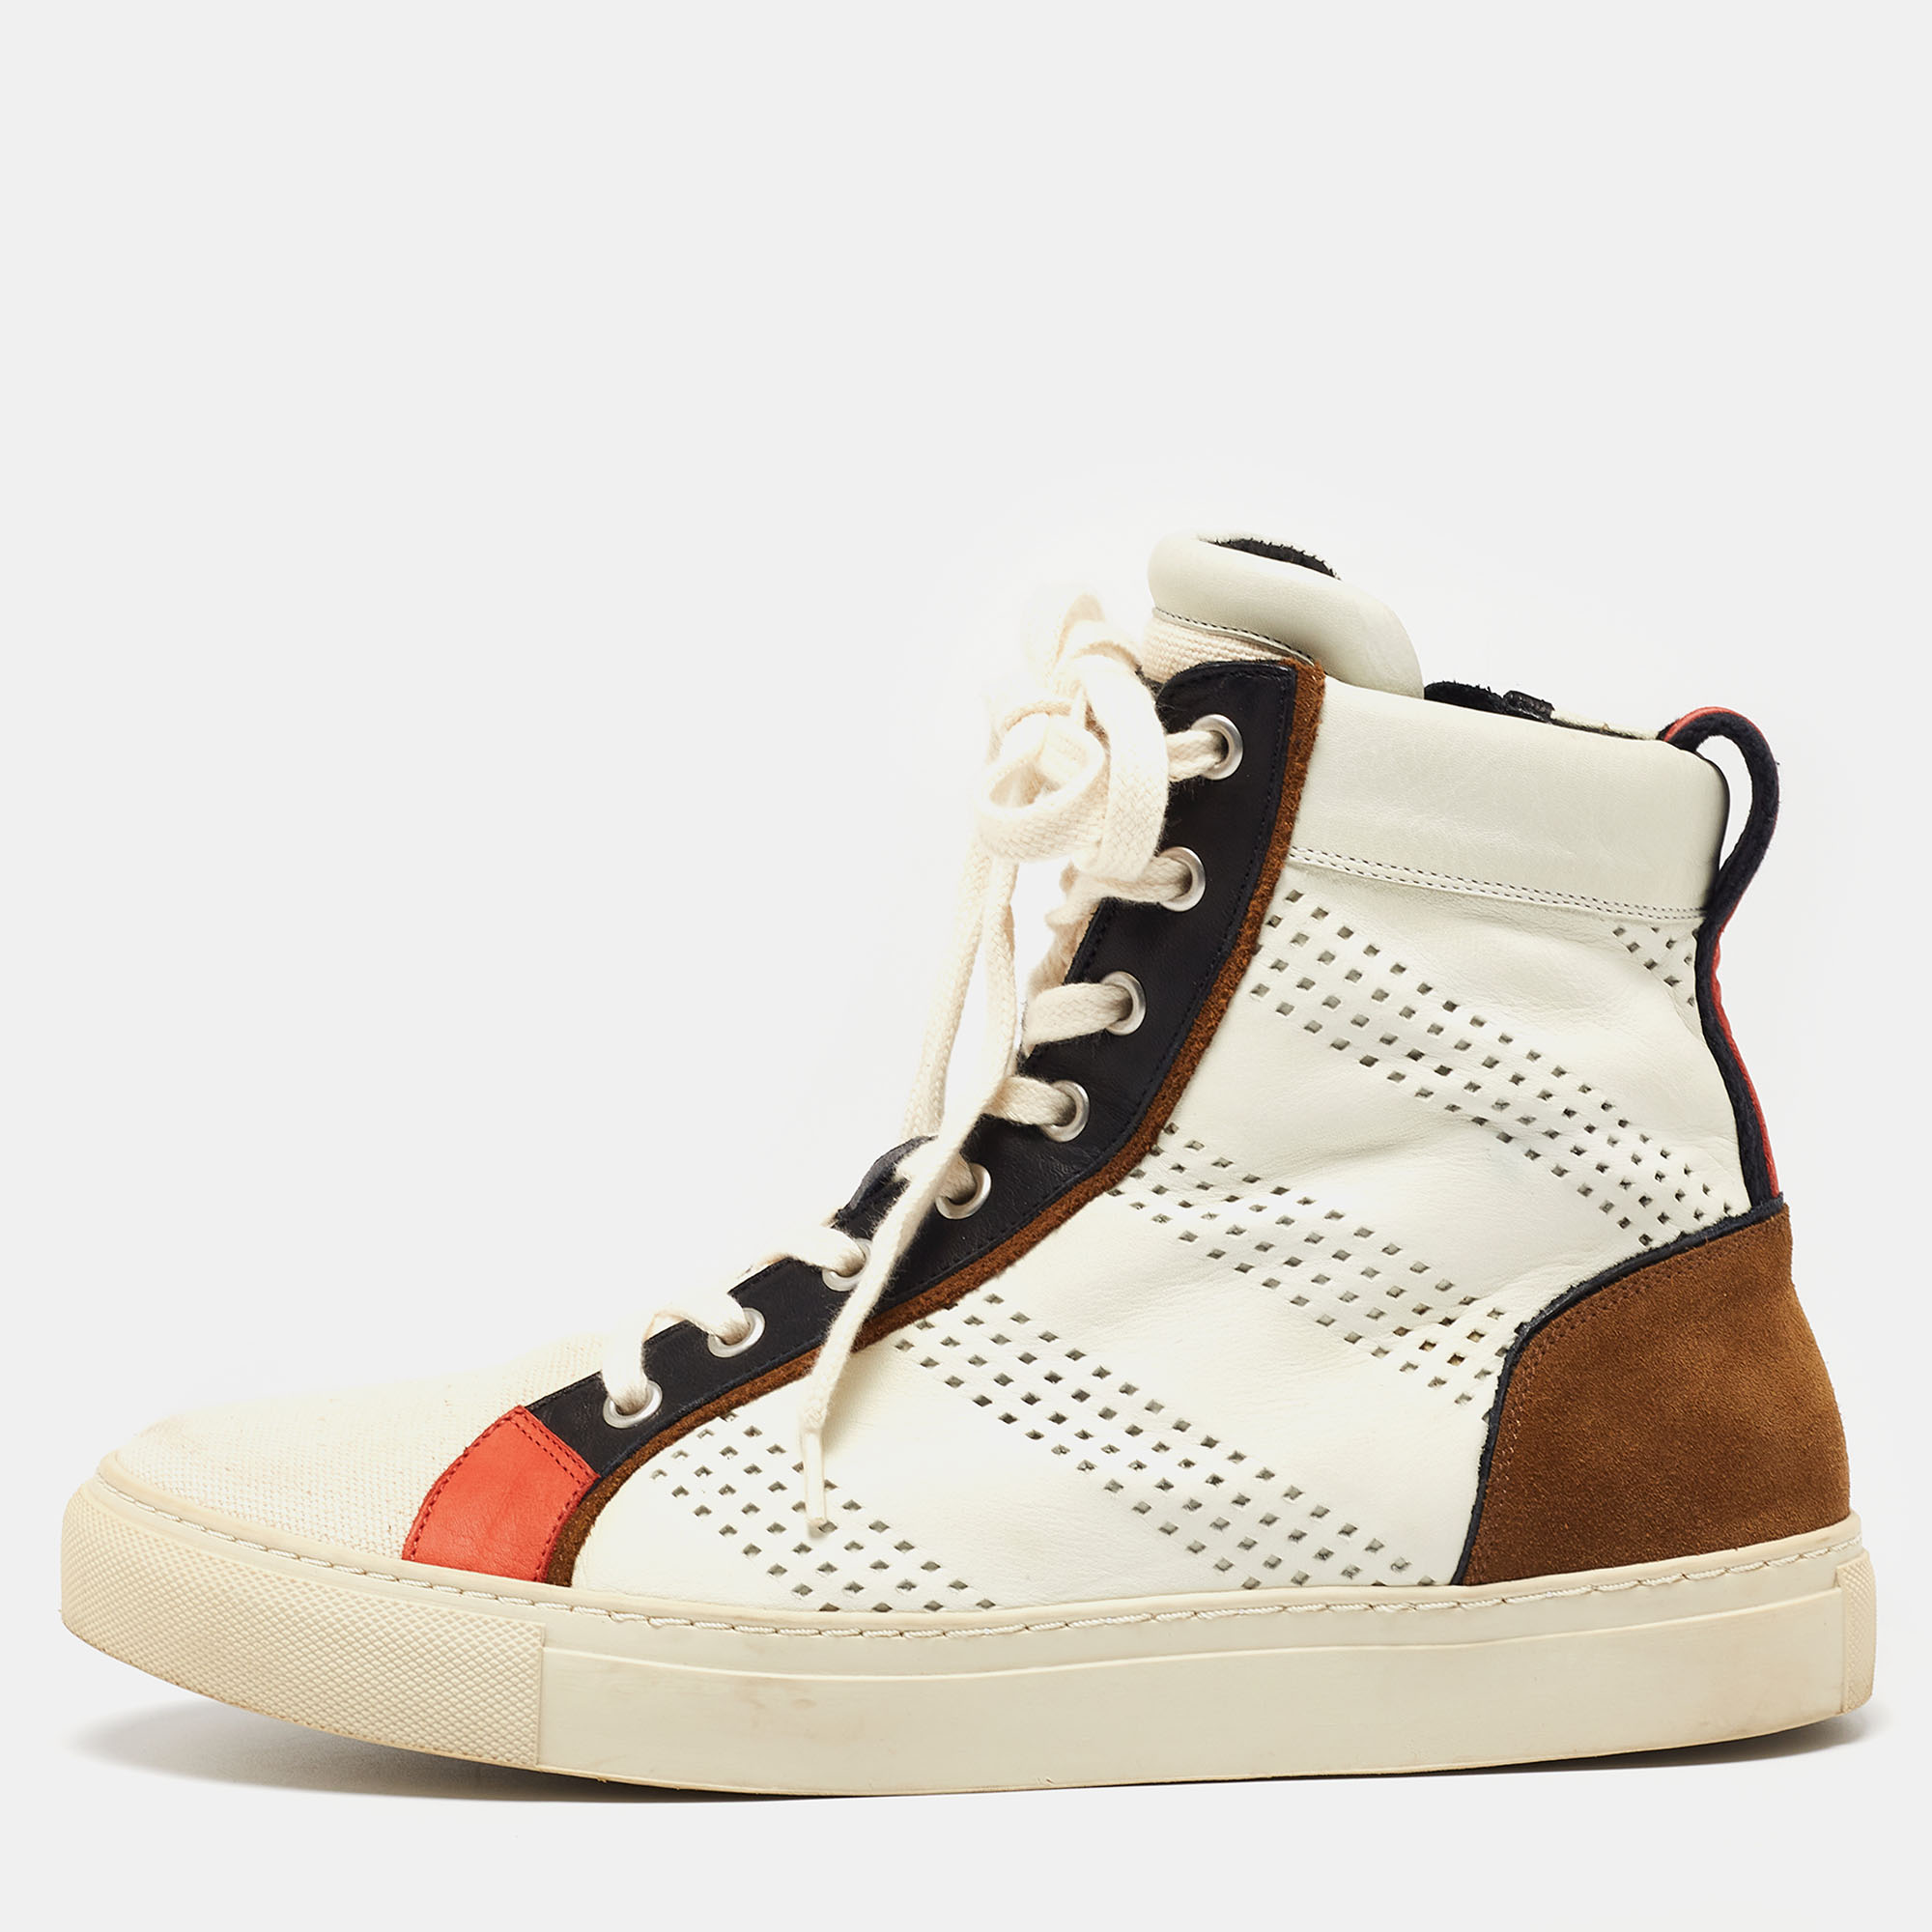 These pre owned Balmain high top sneakers for men come crafted from leather suede and canvas. Perforated details simple lace ups and durable soles make these shoes a great pick.